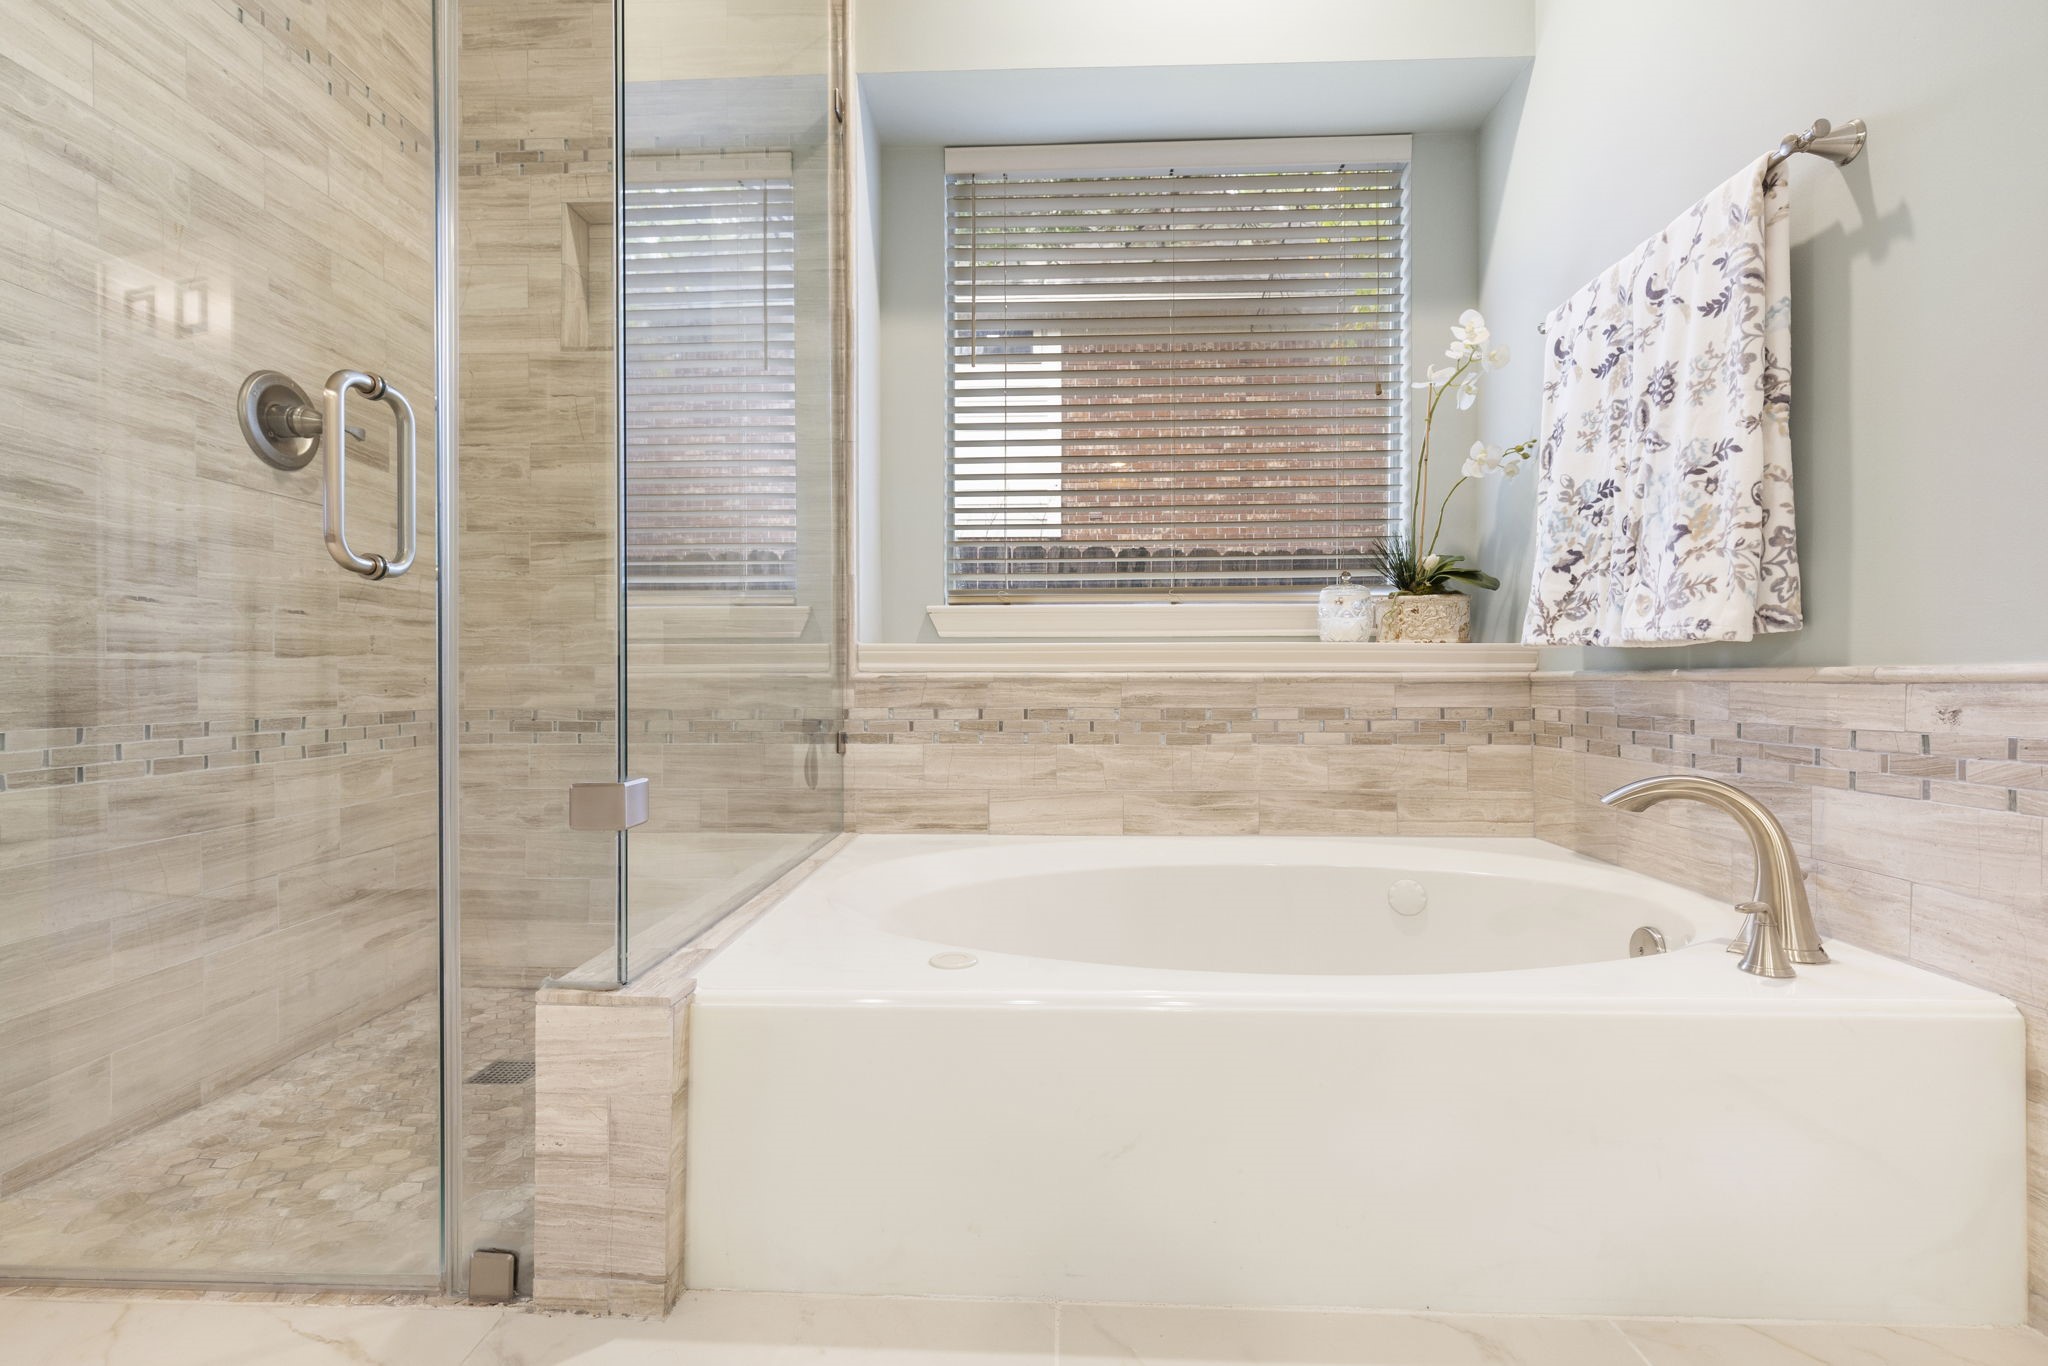 This tub and tile area is very inviting and  beautiful light spa colors